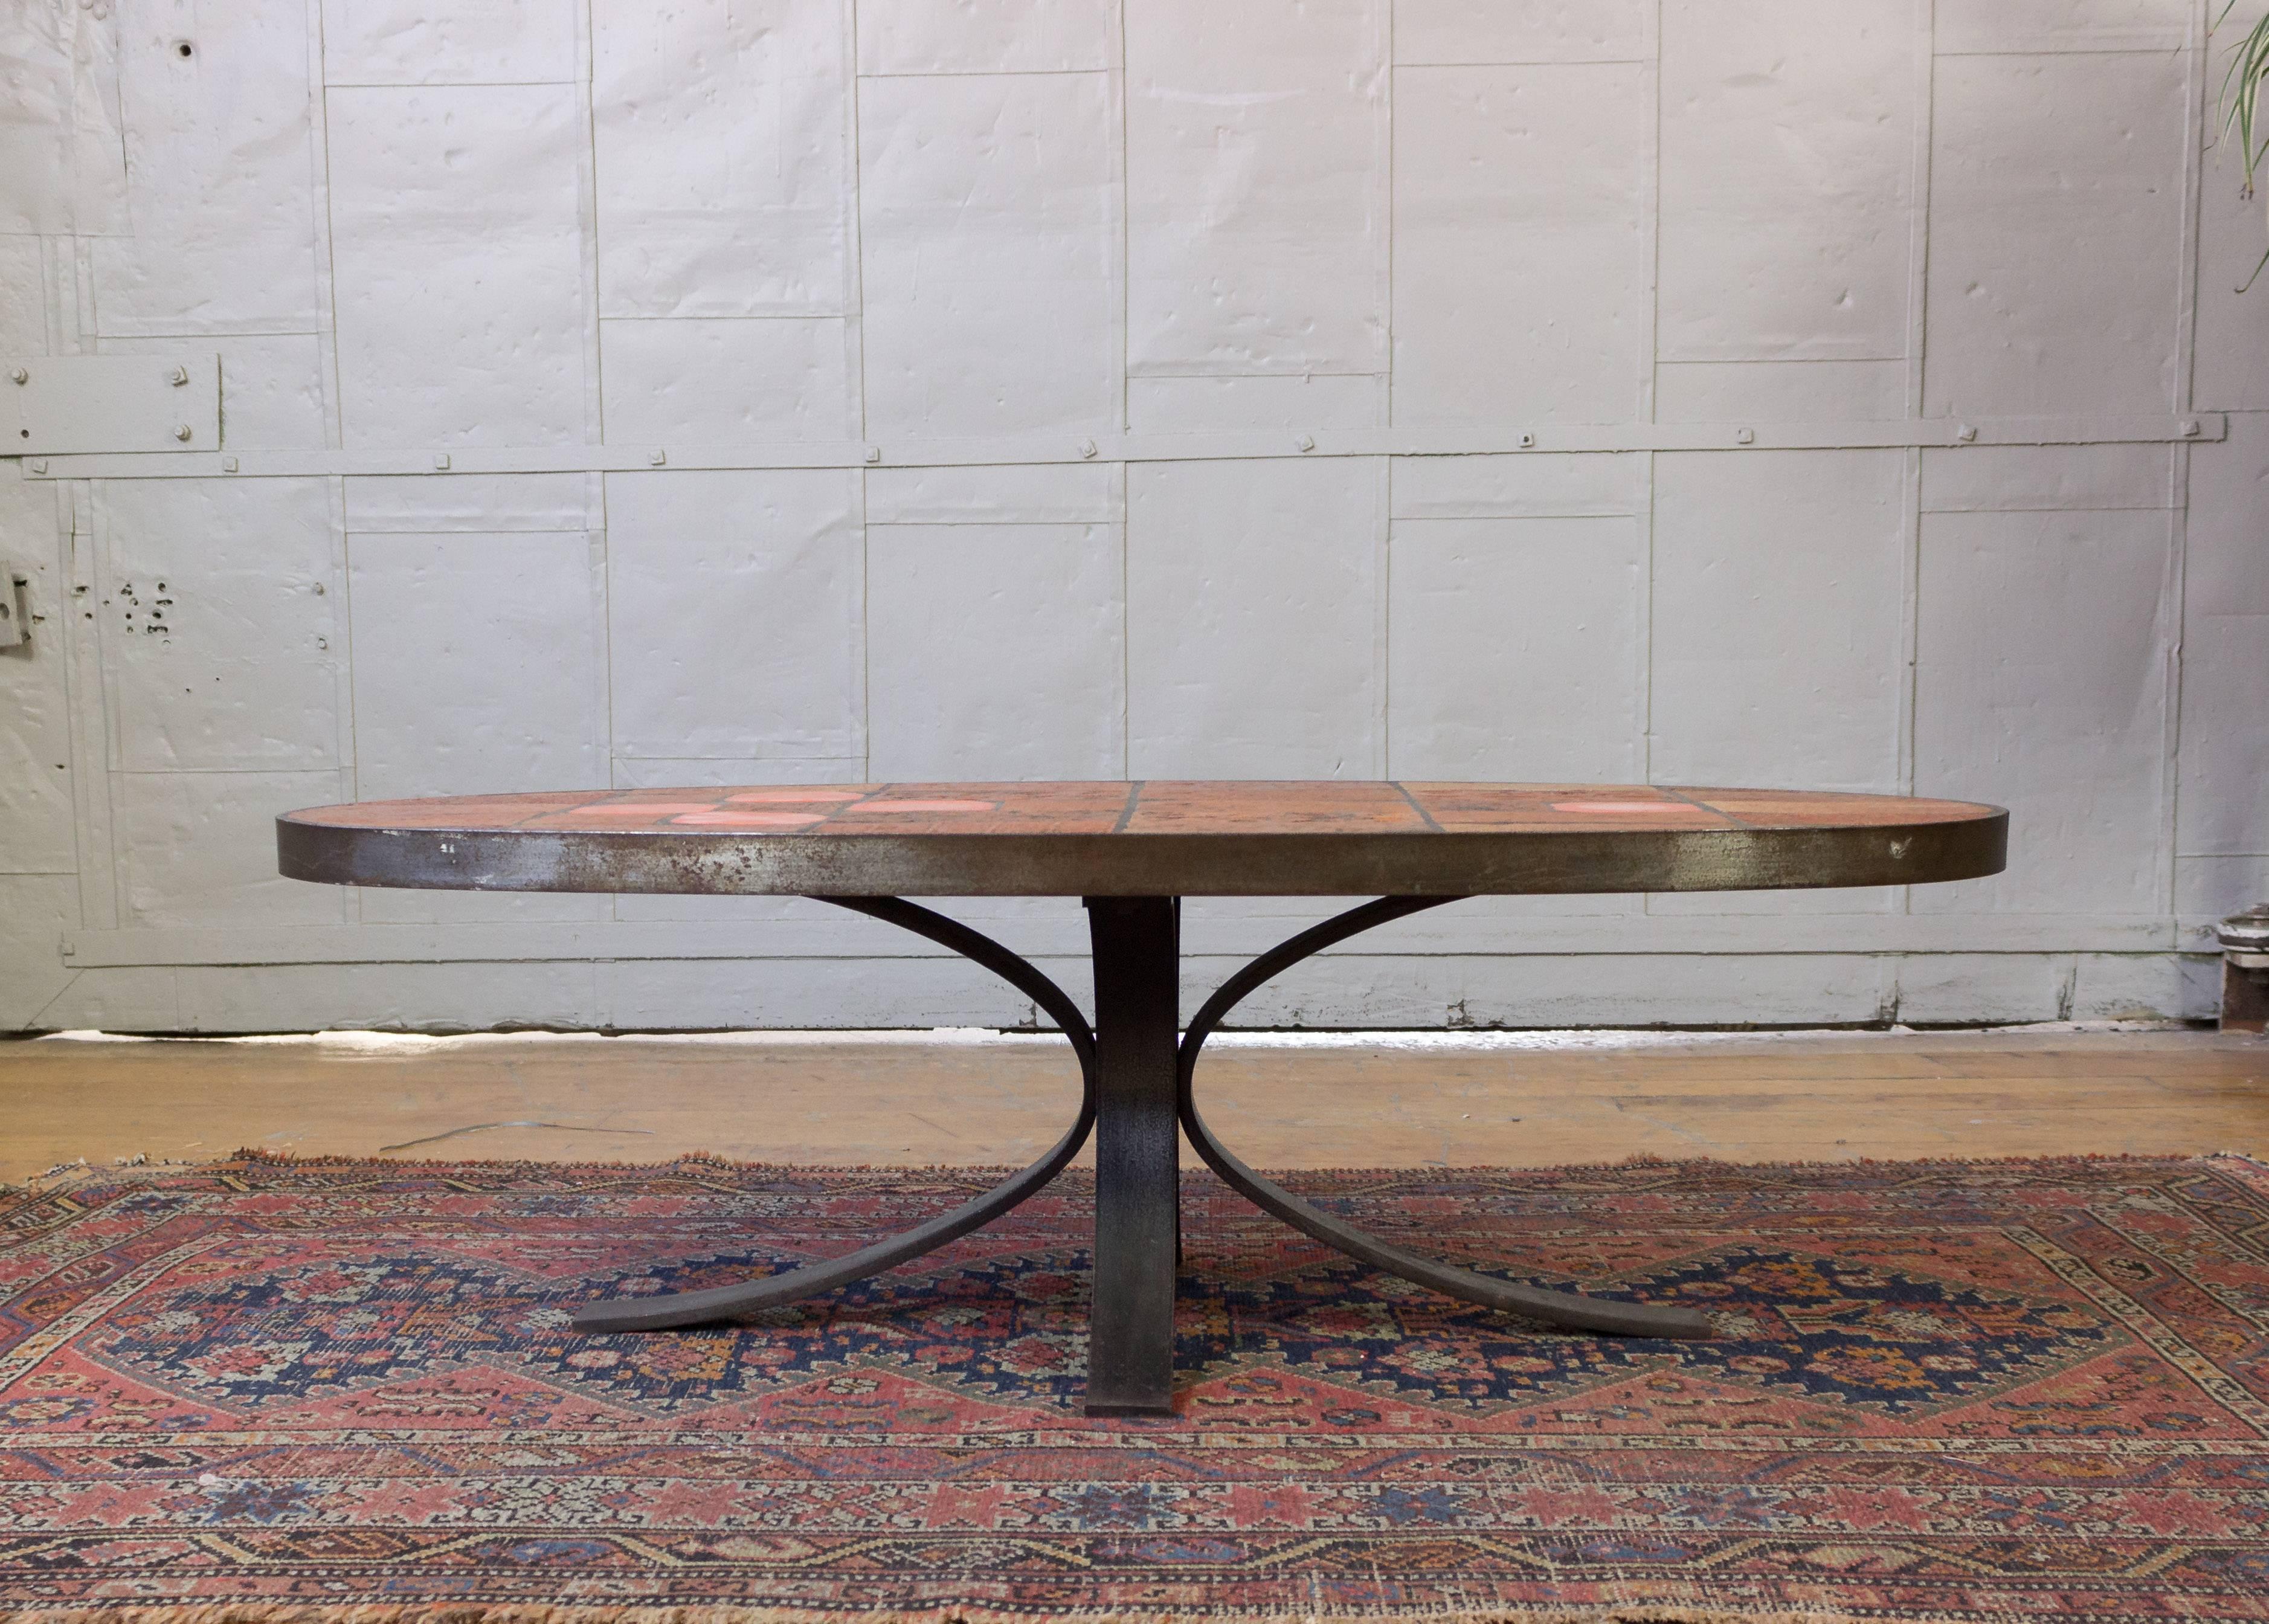 French 1960s oval steel coffee table with ceramic tiles (possibly Vallauris). Very good vintage condition.

Ref #: CT0902-04

Dimensions: 13